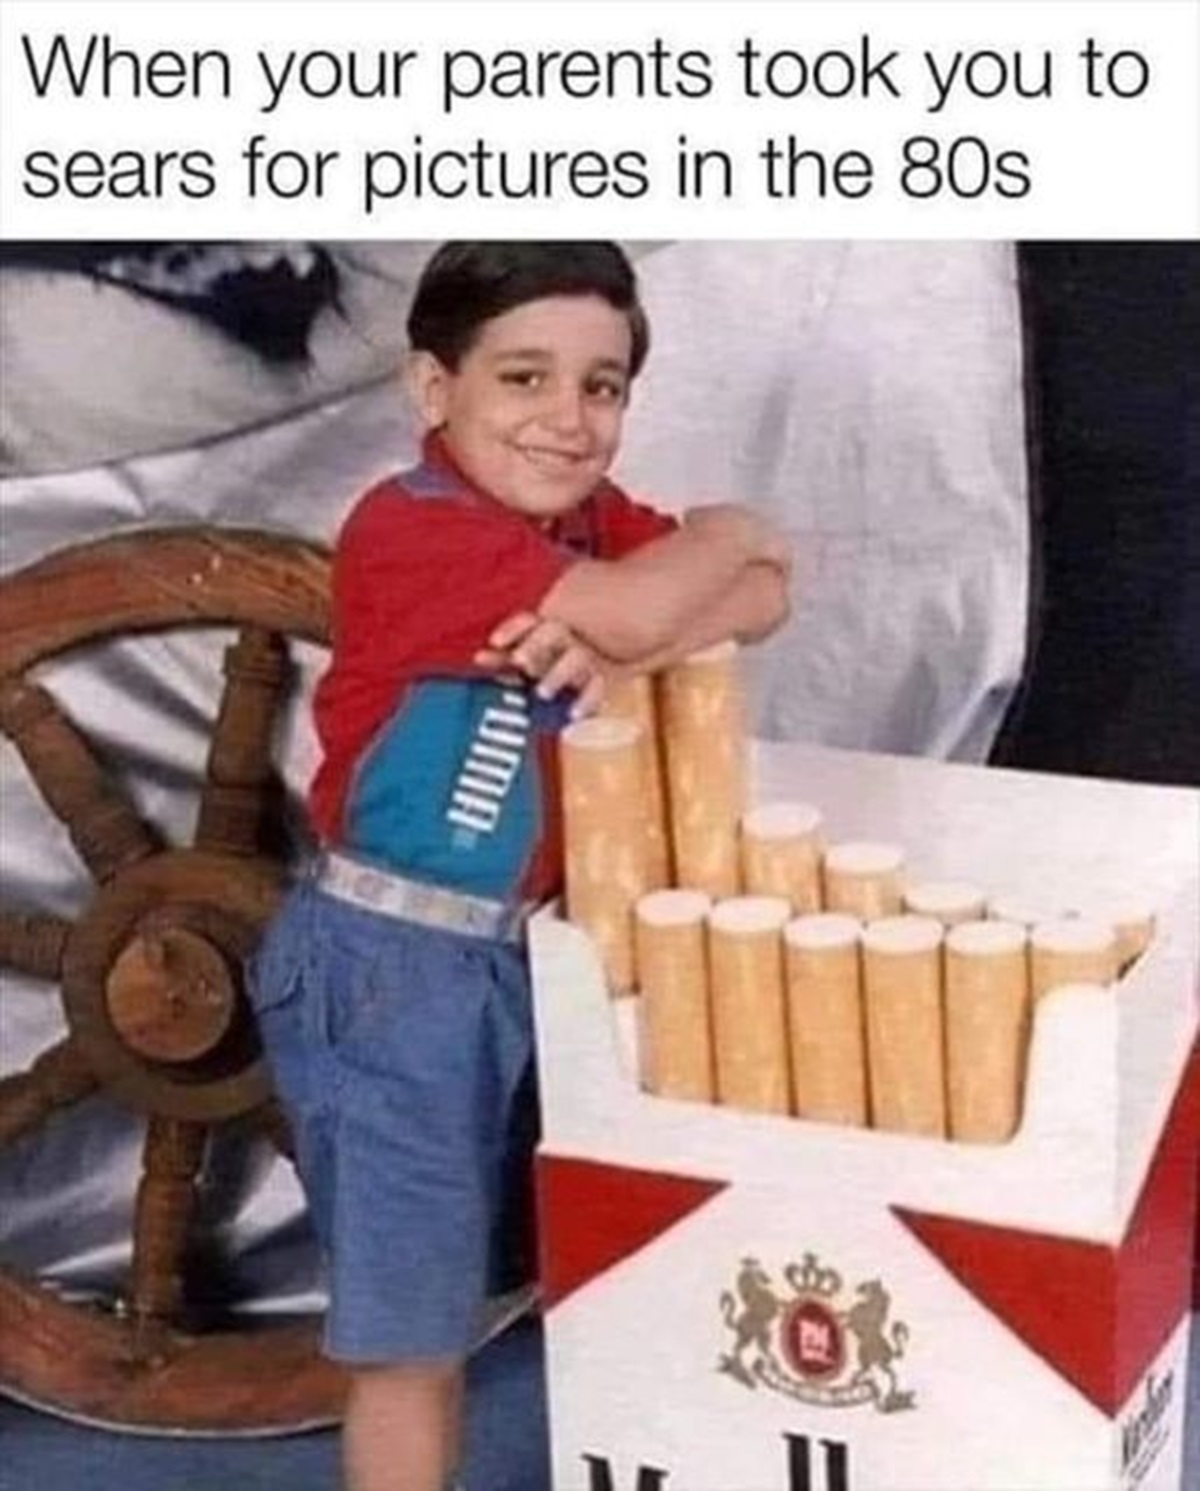 marlboro meme - When your parents took you to sears for pictures in the 80s